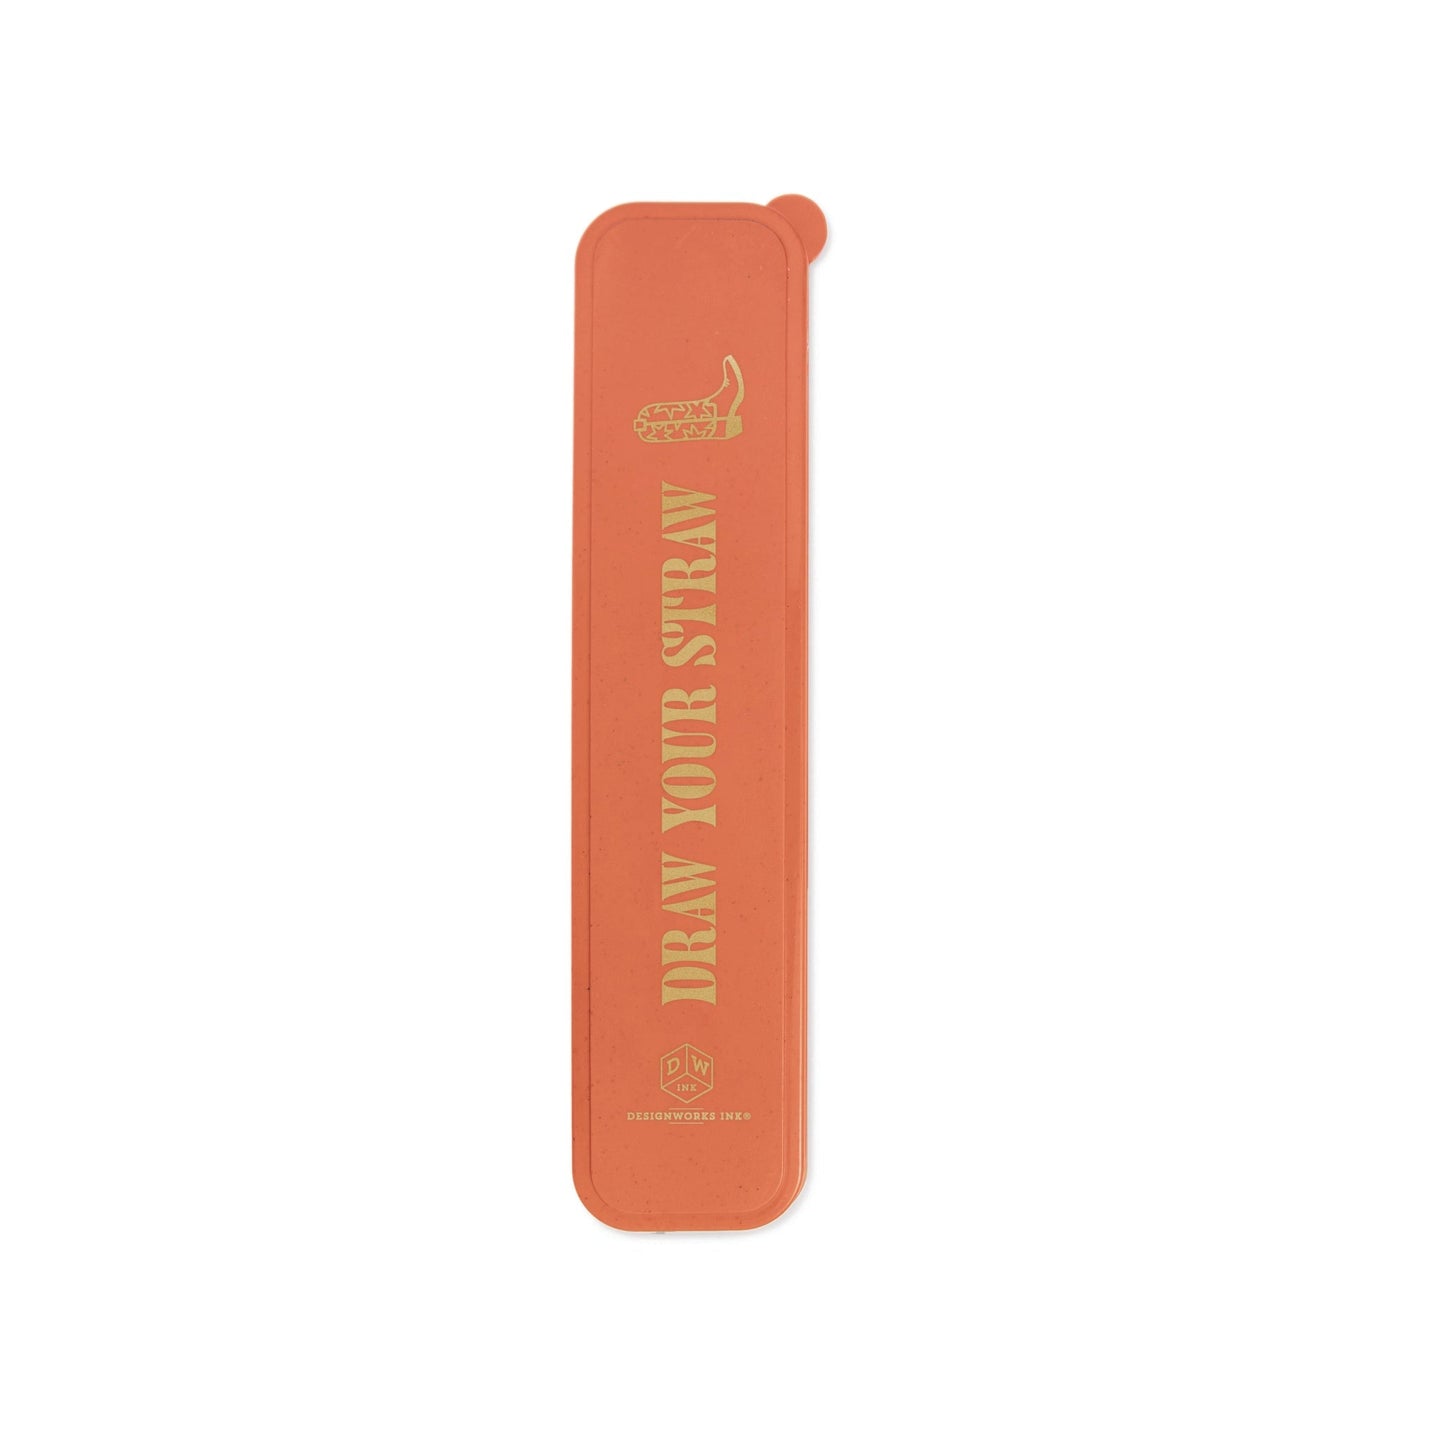 orange case with boot and text embossed in gold; text reads "Draw Your Straw"